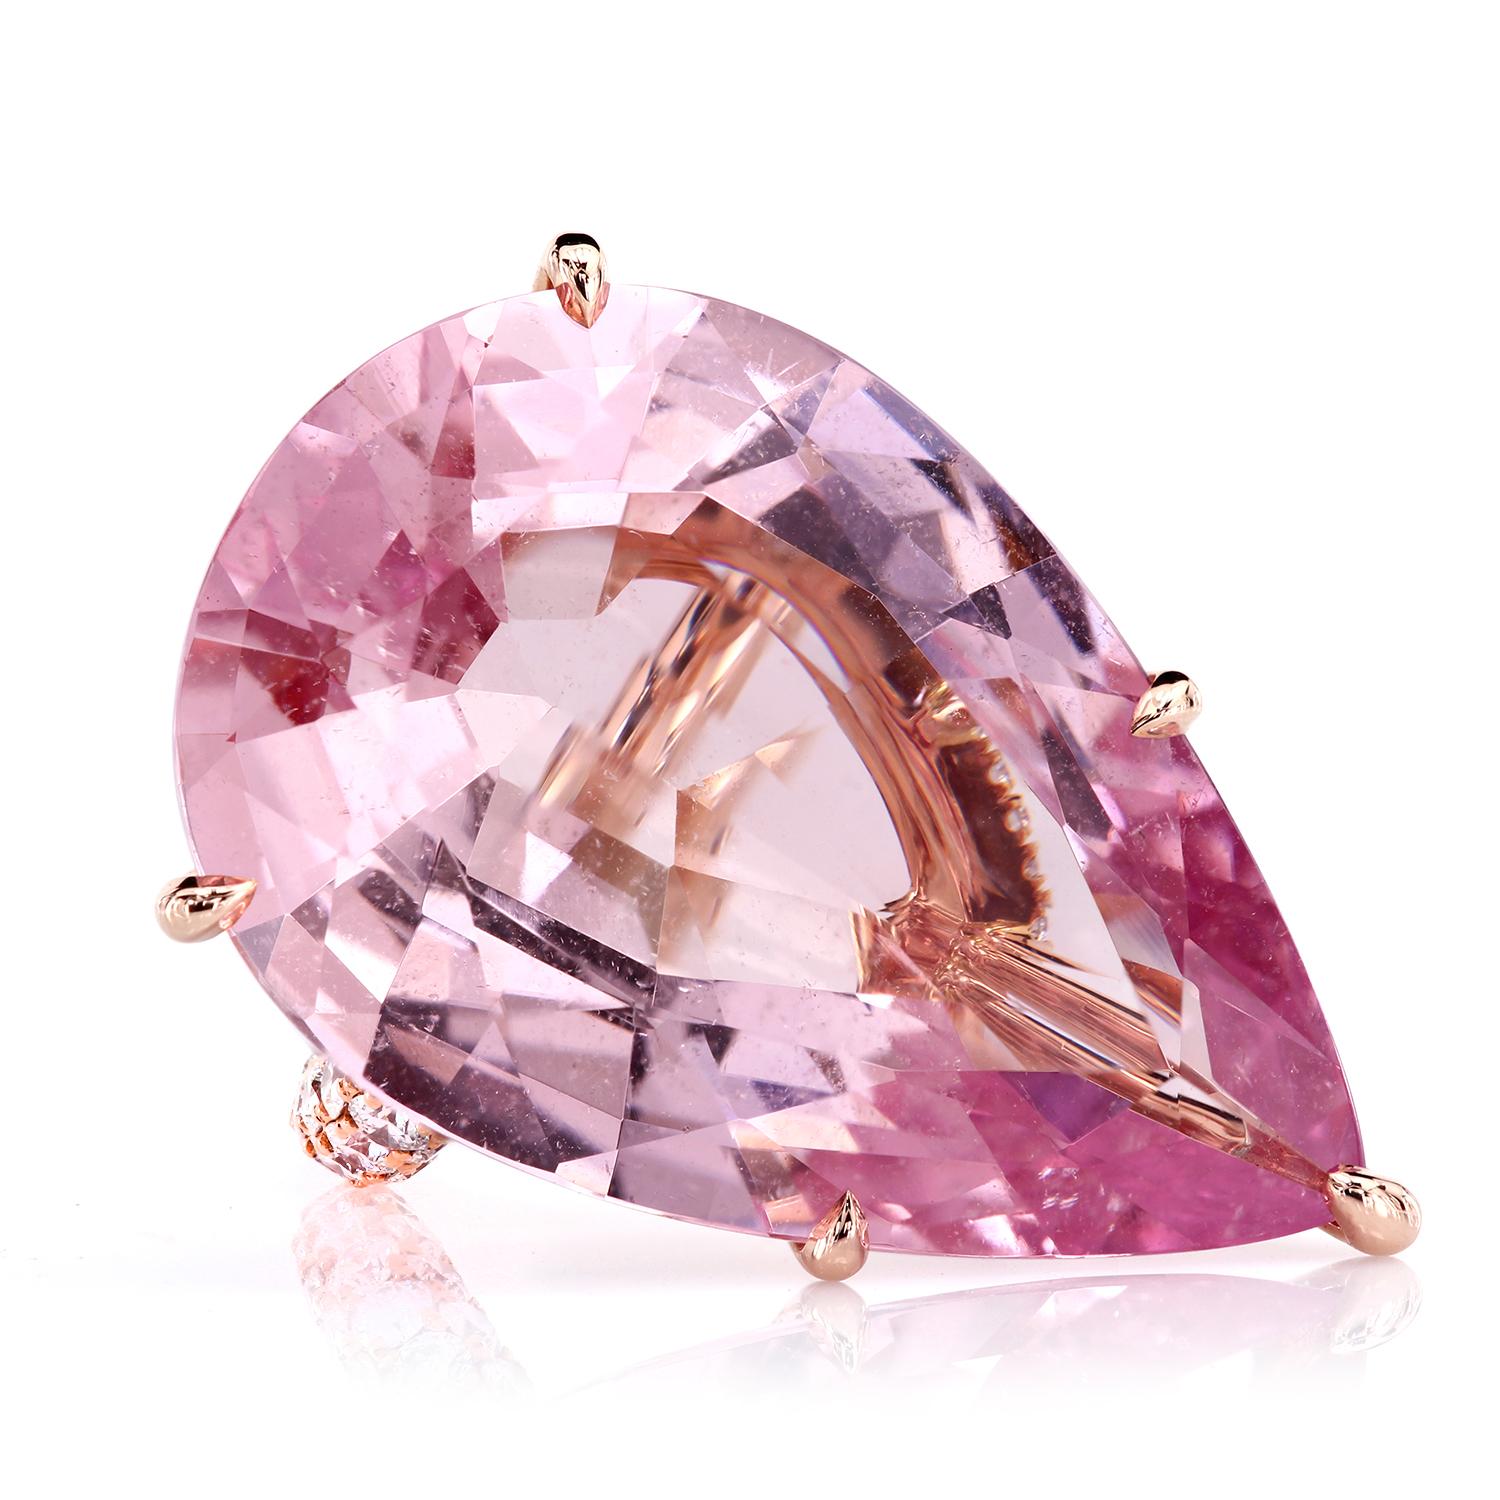 The statement ring featuring a certified 35.73 carats pear-shaped natural pink morganite; GIA #1152101549.
The stone is set in a bespoke 18K rose gold mounting consisting of a diamond micro pave-encrusted basket and pave-set shank with three rows of